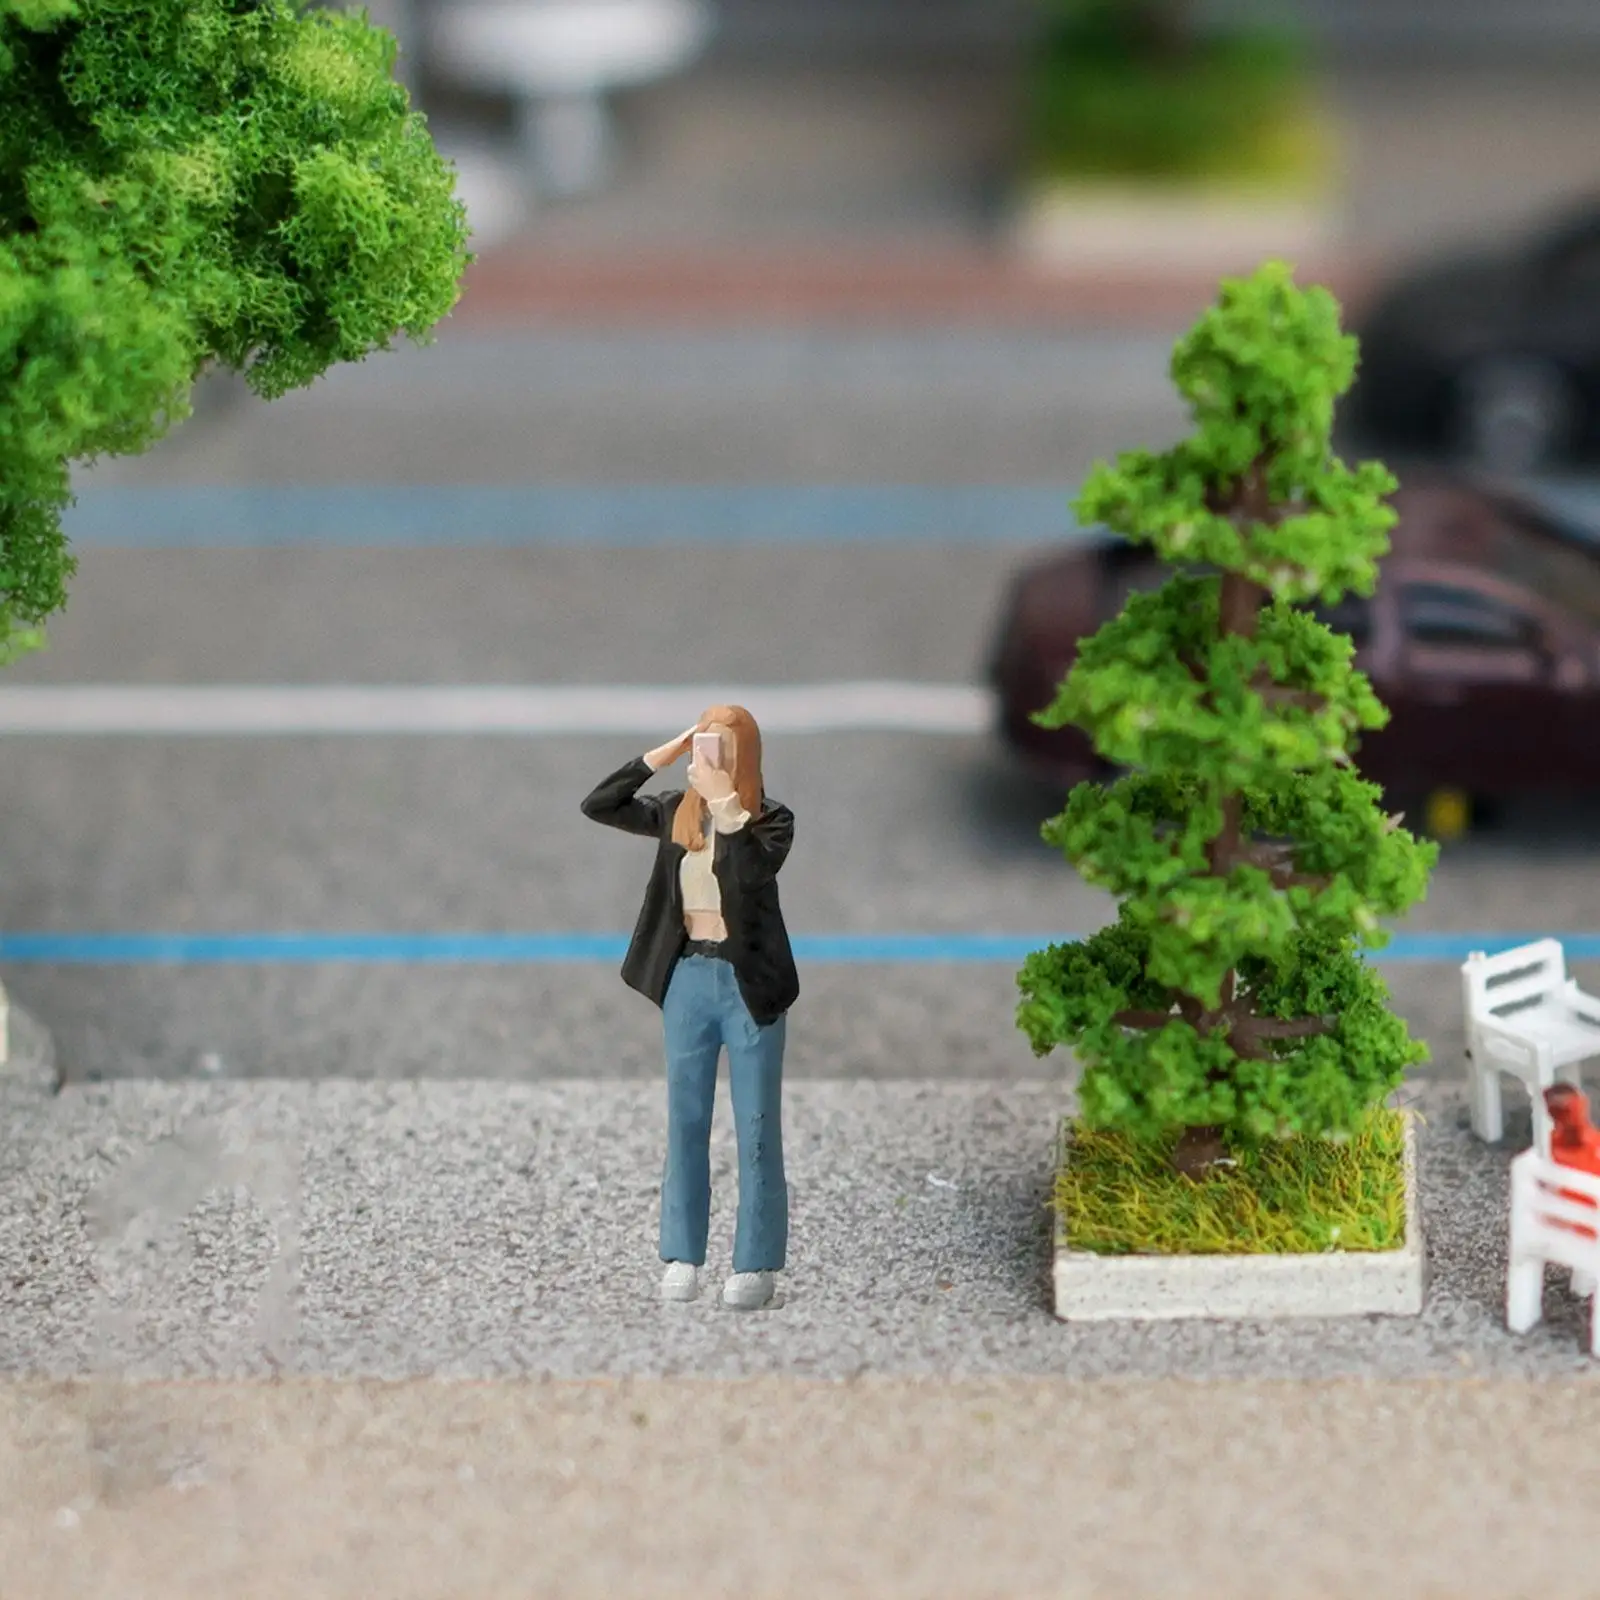 1/64 People Figures Train Park Street People Figures Resin Hand Painted for DIY Scene Dollhouse Photography Props Diorama Decor